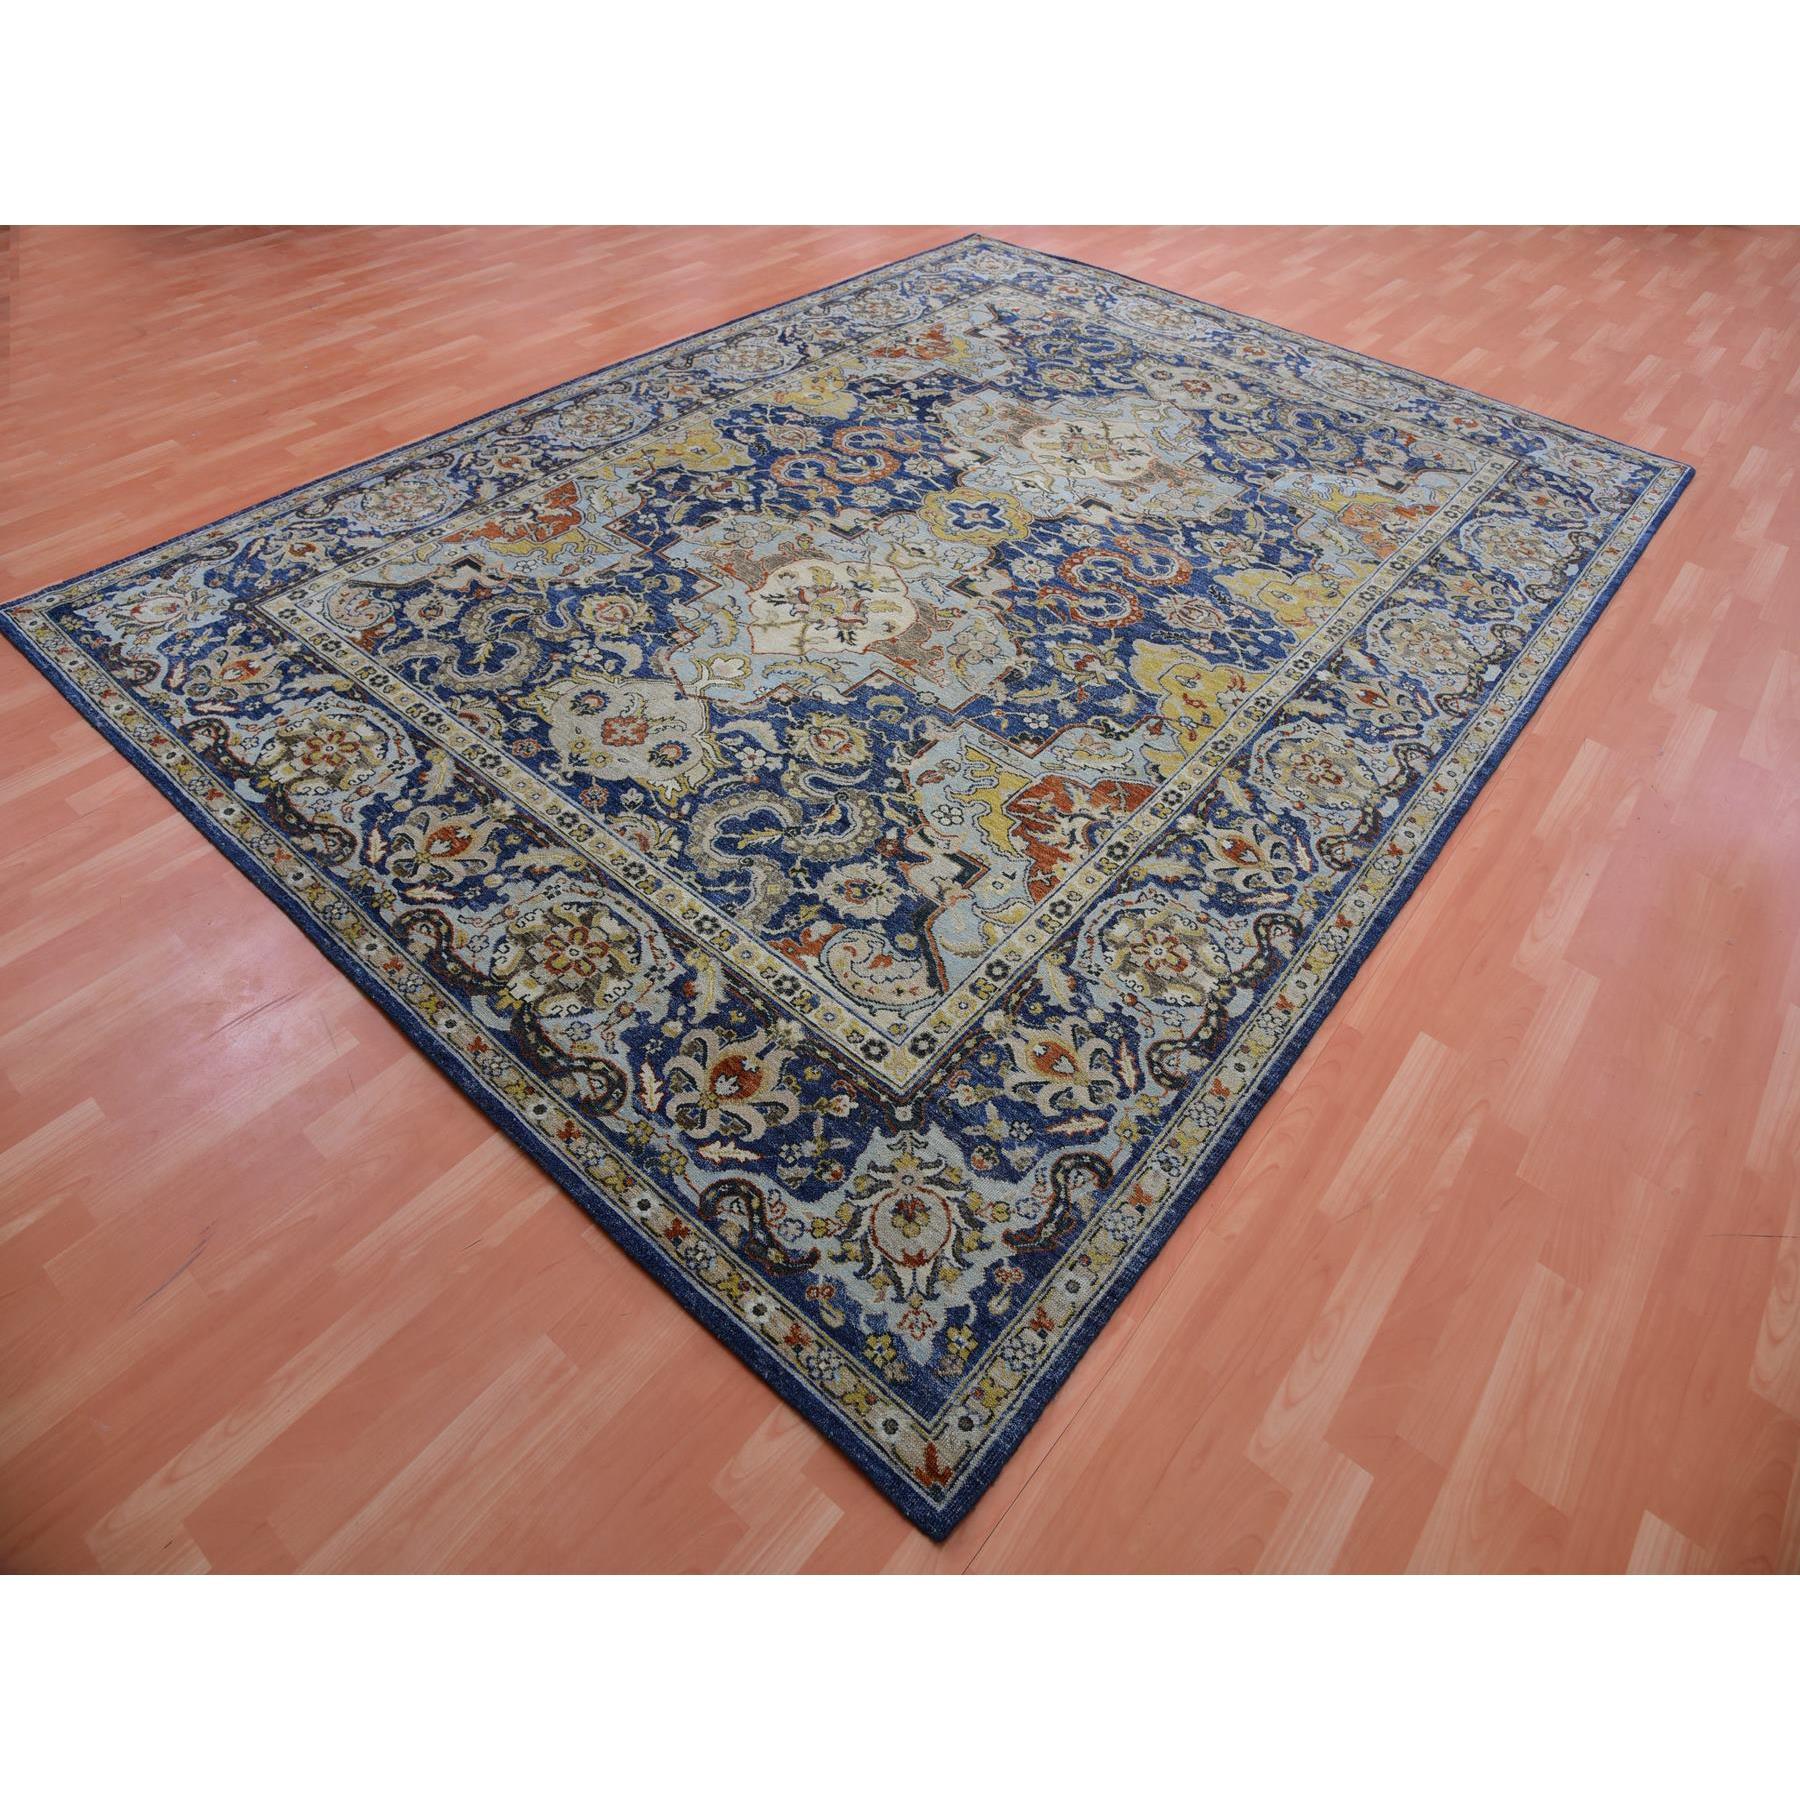 Indian Beacon Blue Antique Persian Isphahan Inspired Wool Hand Knotted Rug 9'x12'3